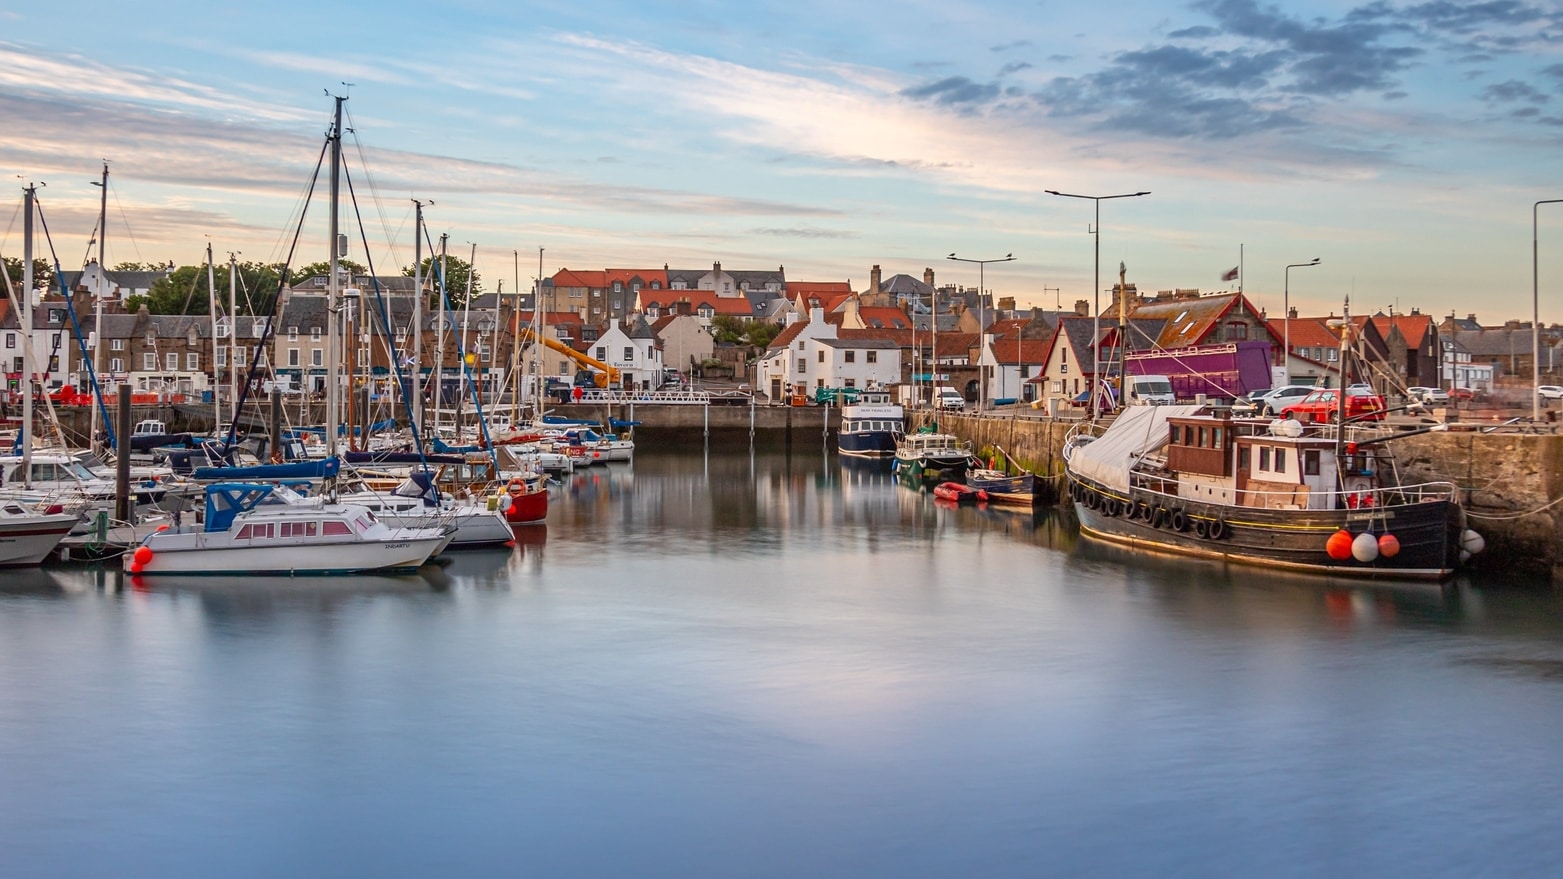 Anstruther Harbour in Scotland